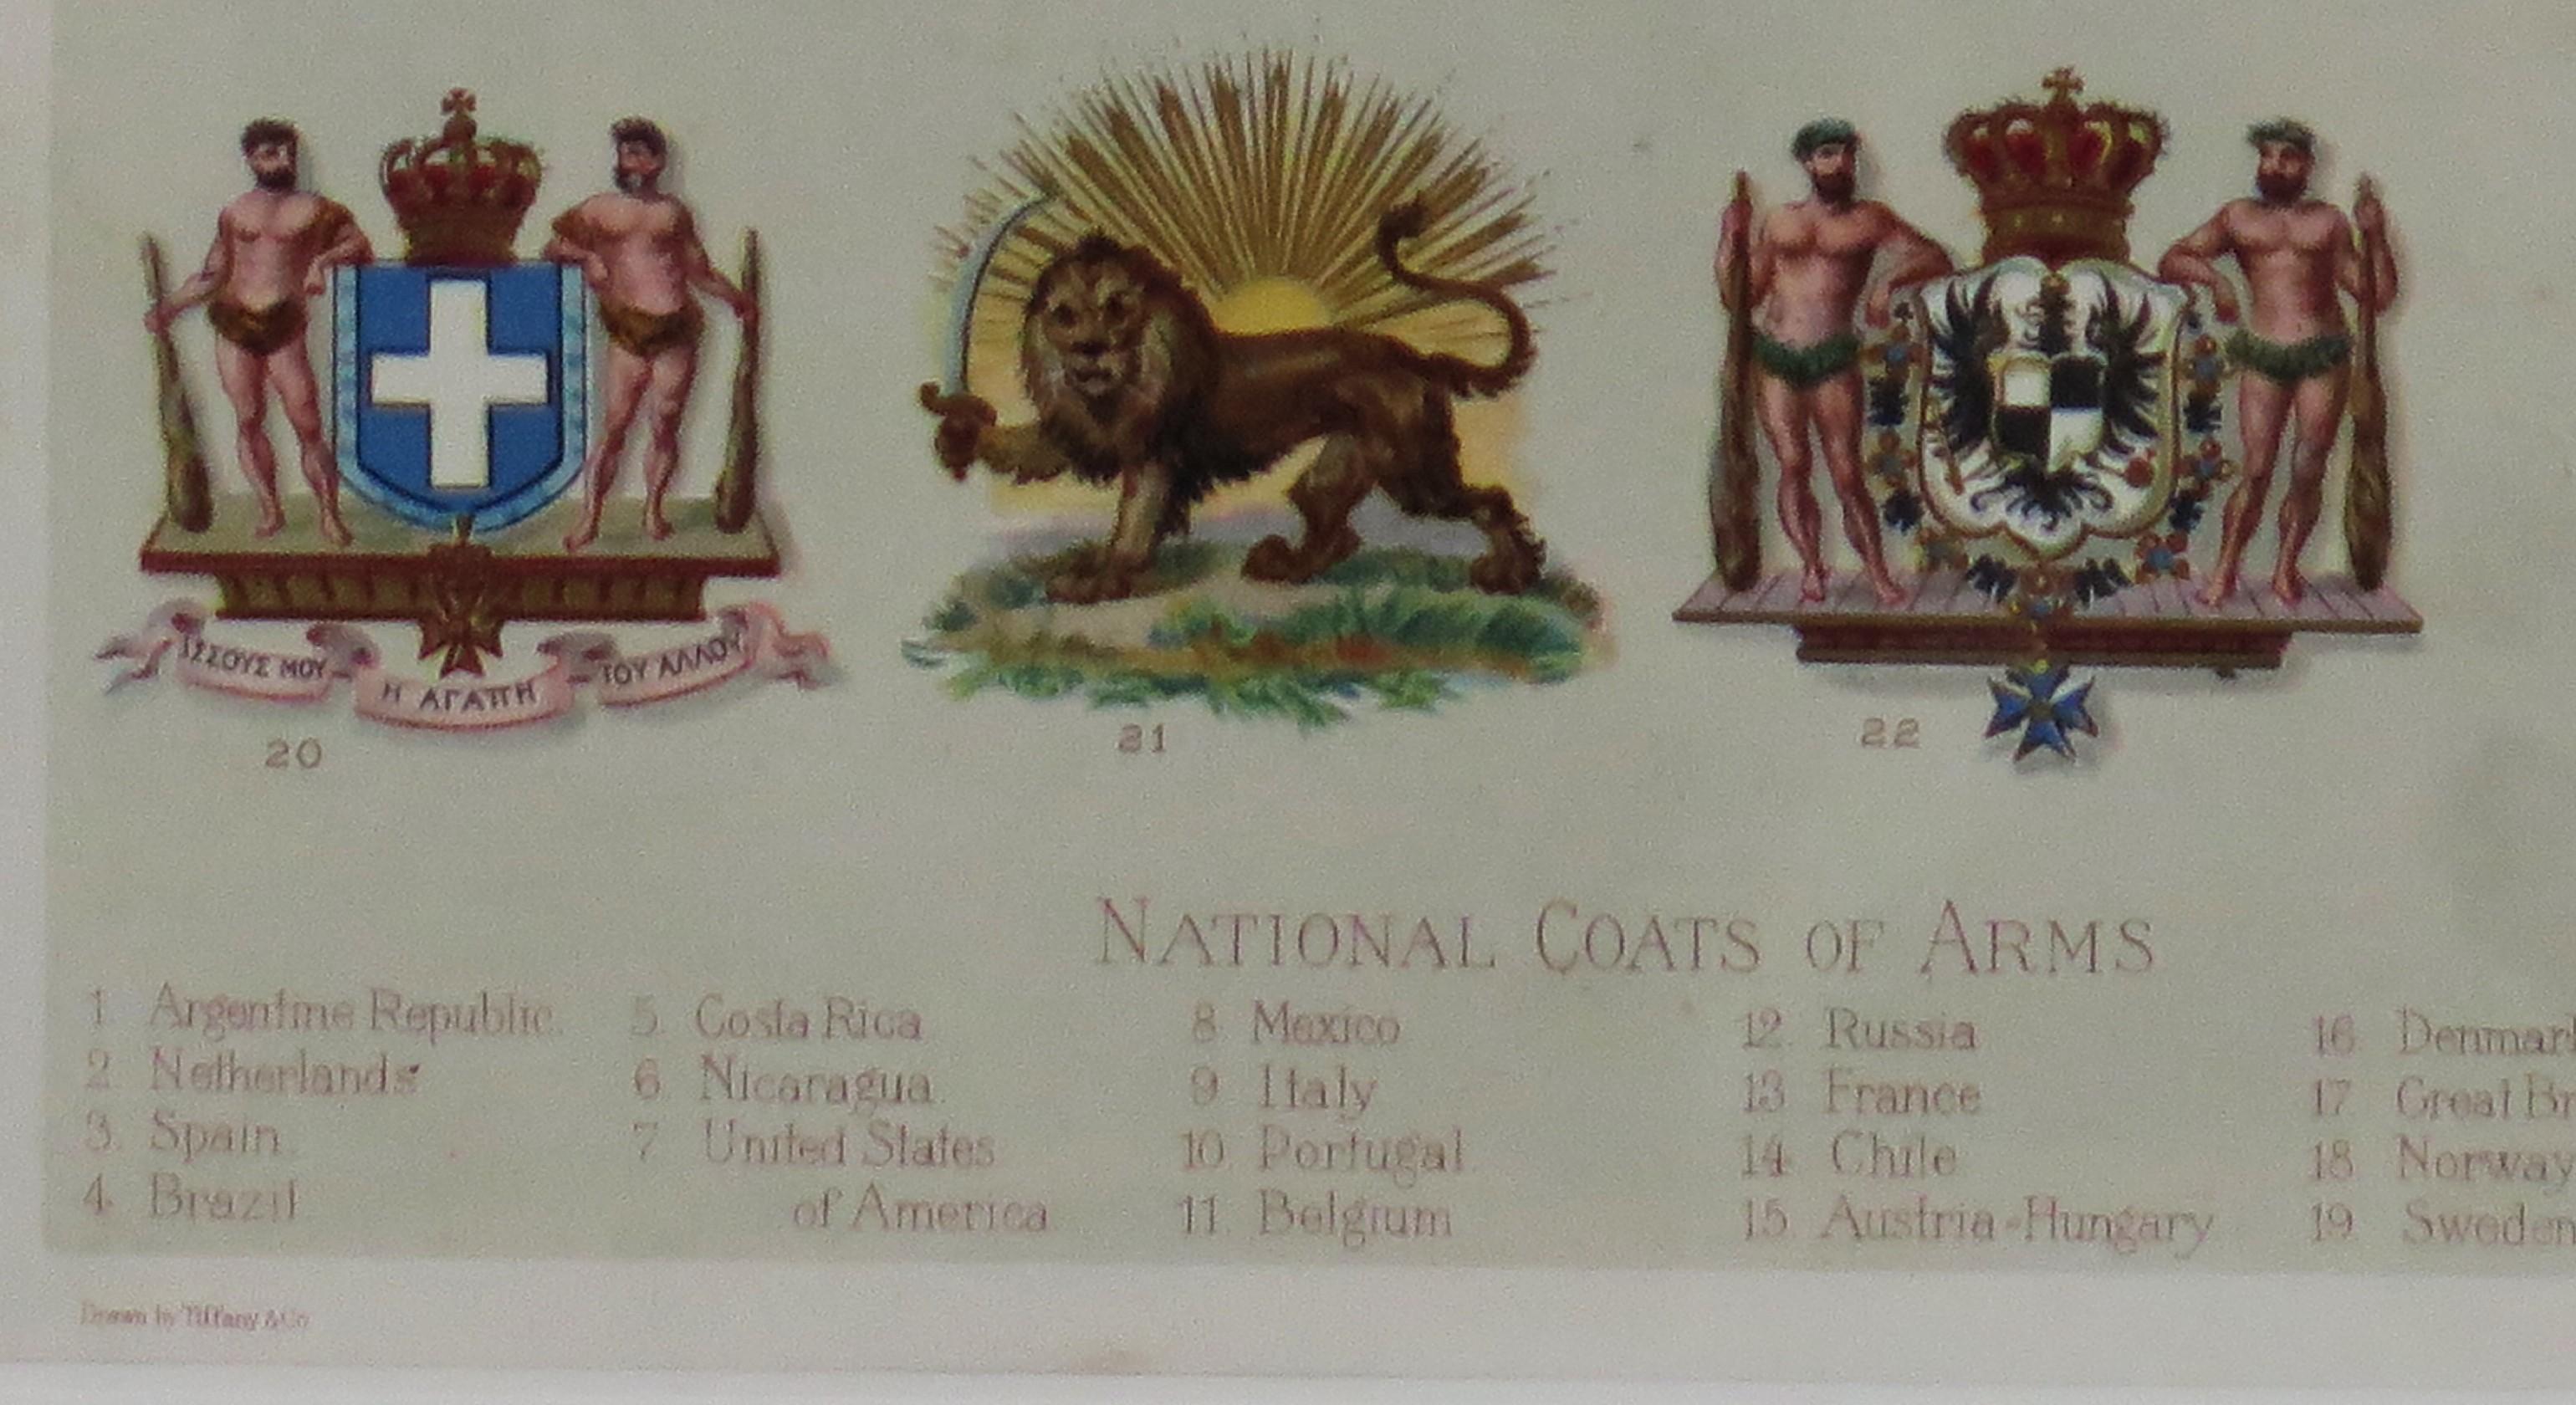 19th Century Mounted Print of National Coats of Arms by Tiffany & Co. from 1895 Encyclopedia  For Sale